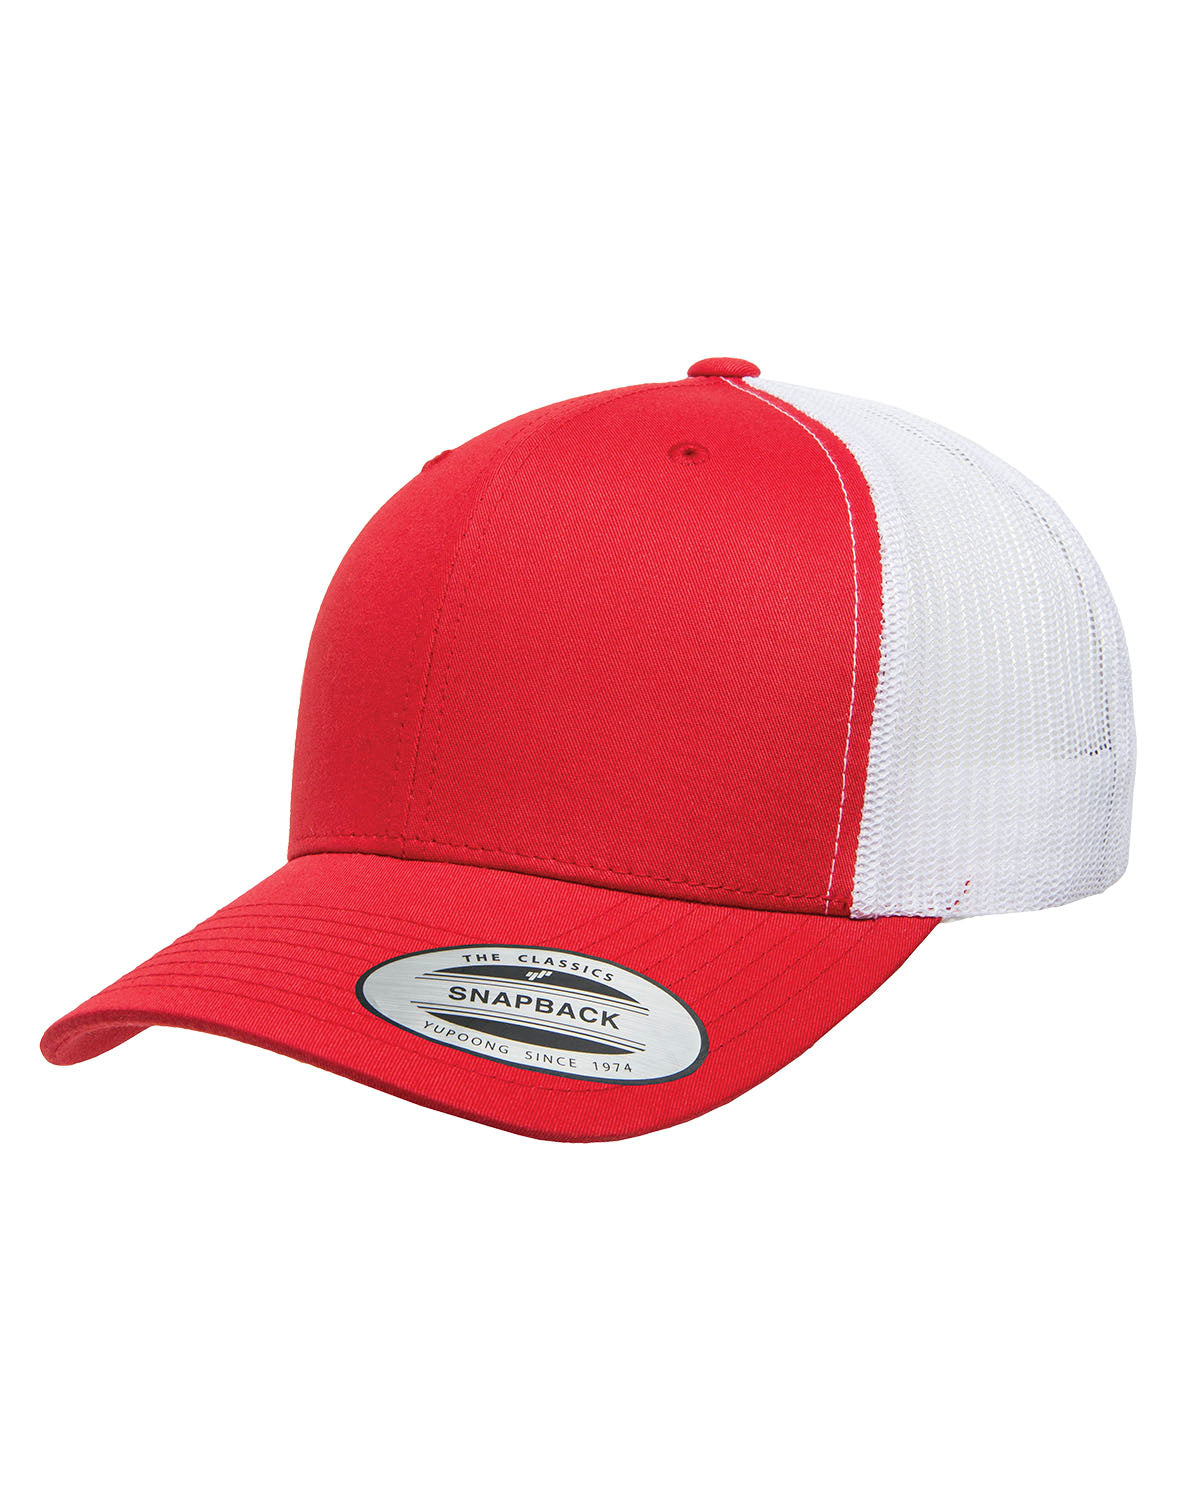 OMS Fastpitch Yupoong Adult Retro Trucker Cap 6606